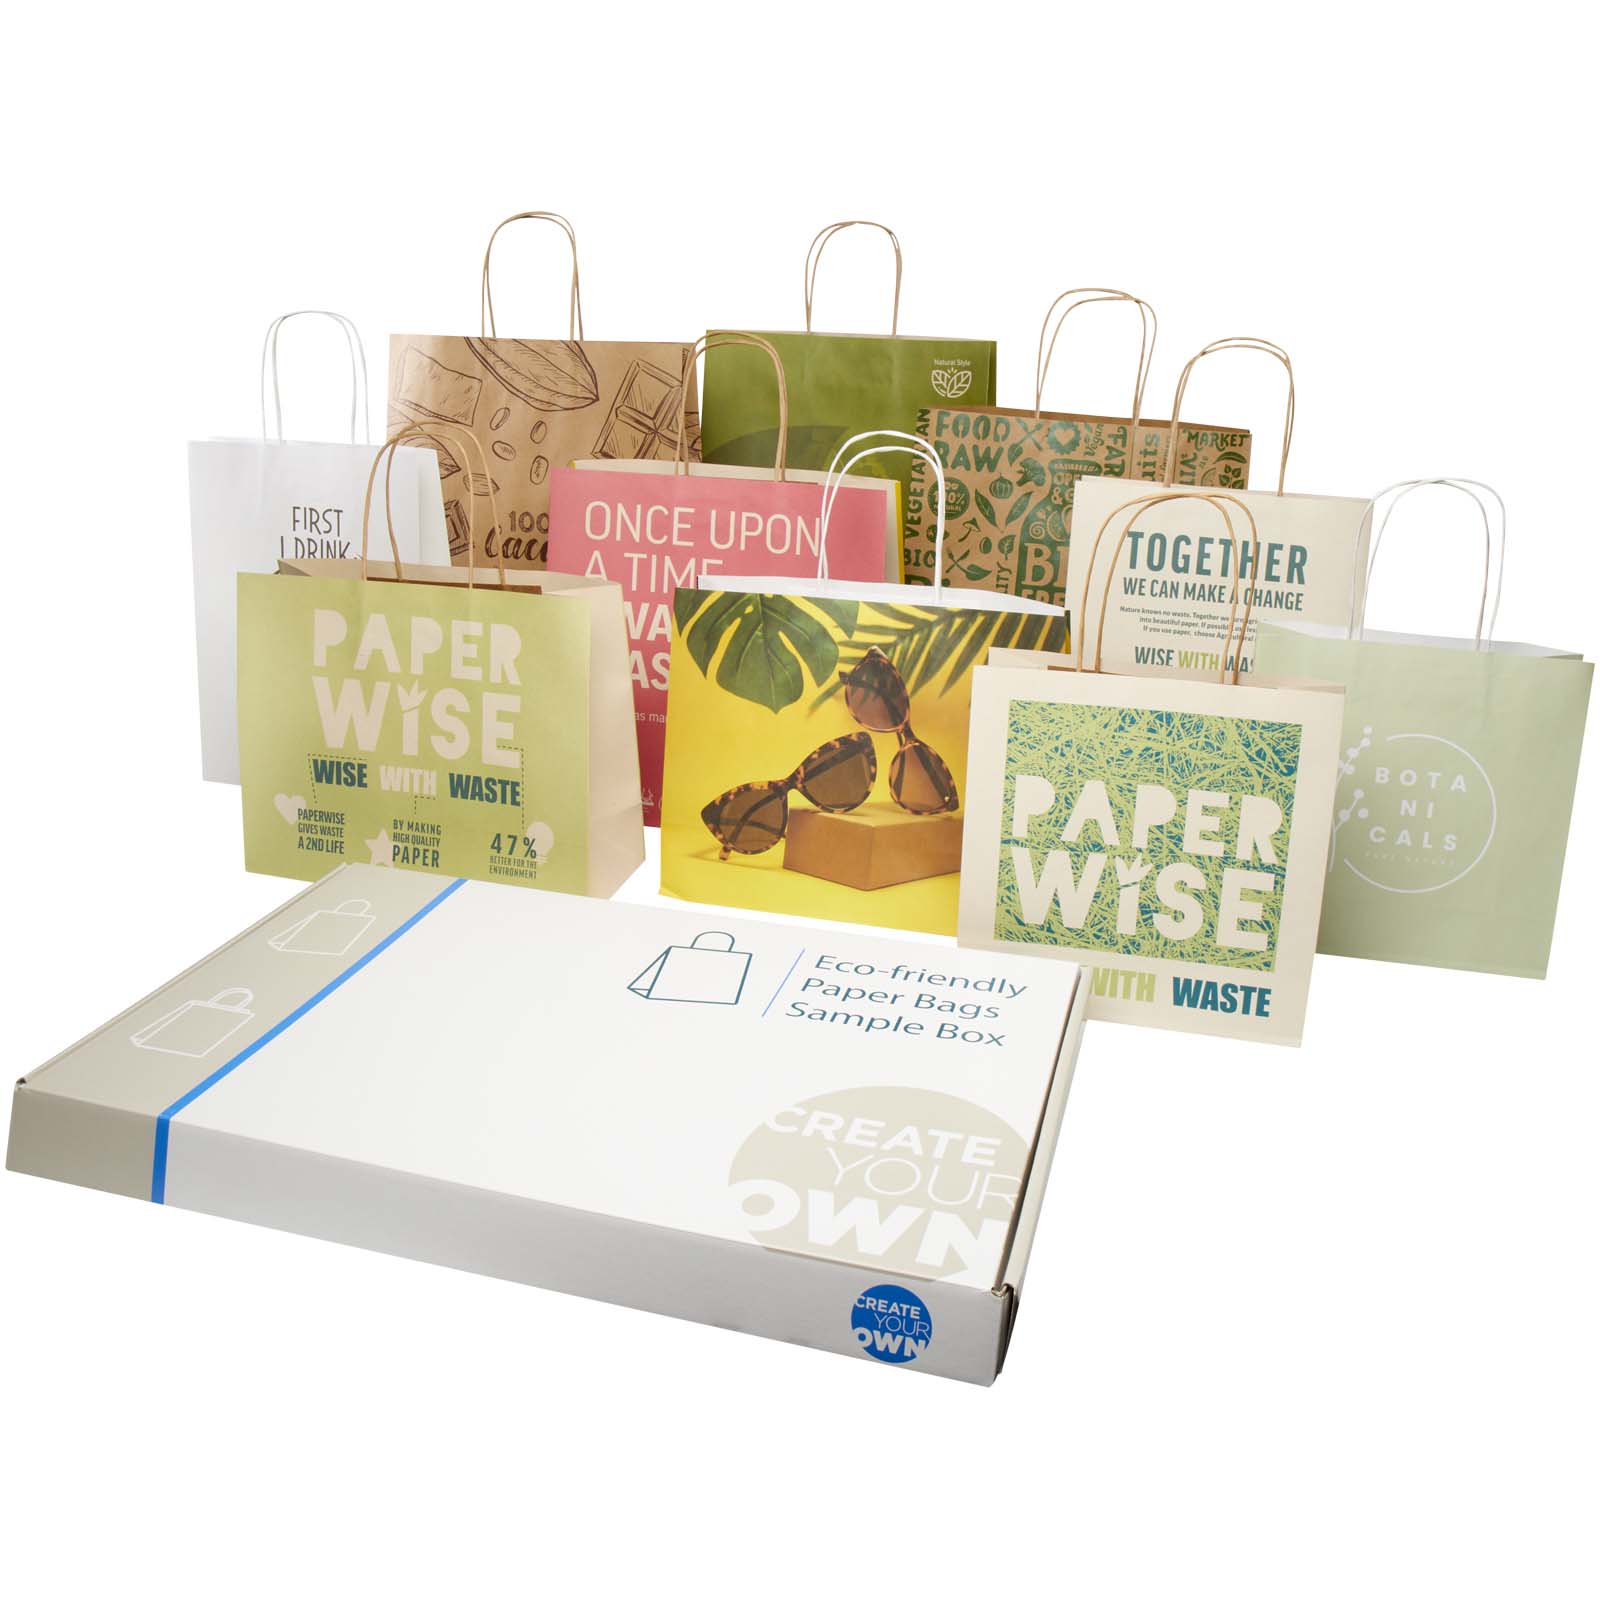 Advertising Paper Bags - Agricultural waste and kraft paper bags sample box - 0